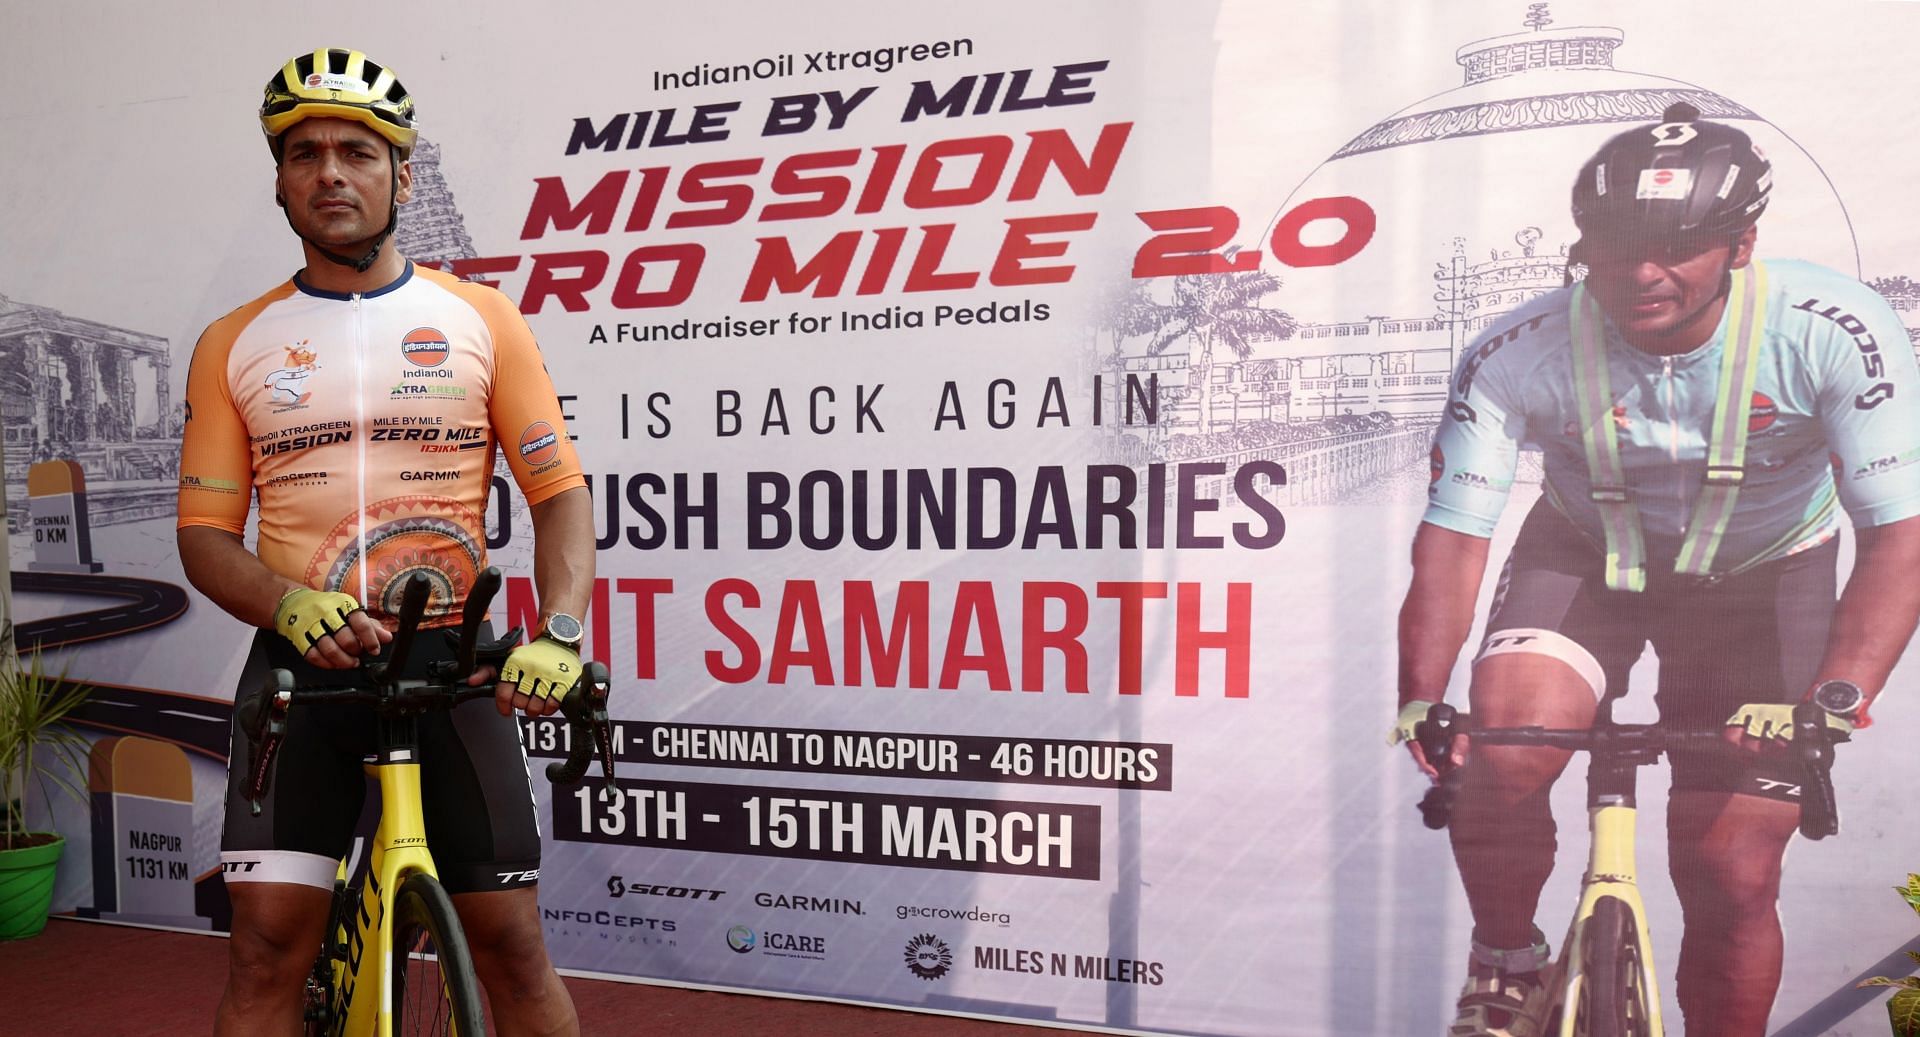 Amit Samarth completed a 1131-km distance from Chennai to Nagpur in under 45 hours. (Pic credit: Team Samarth)